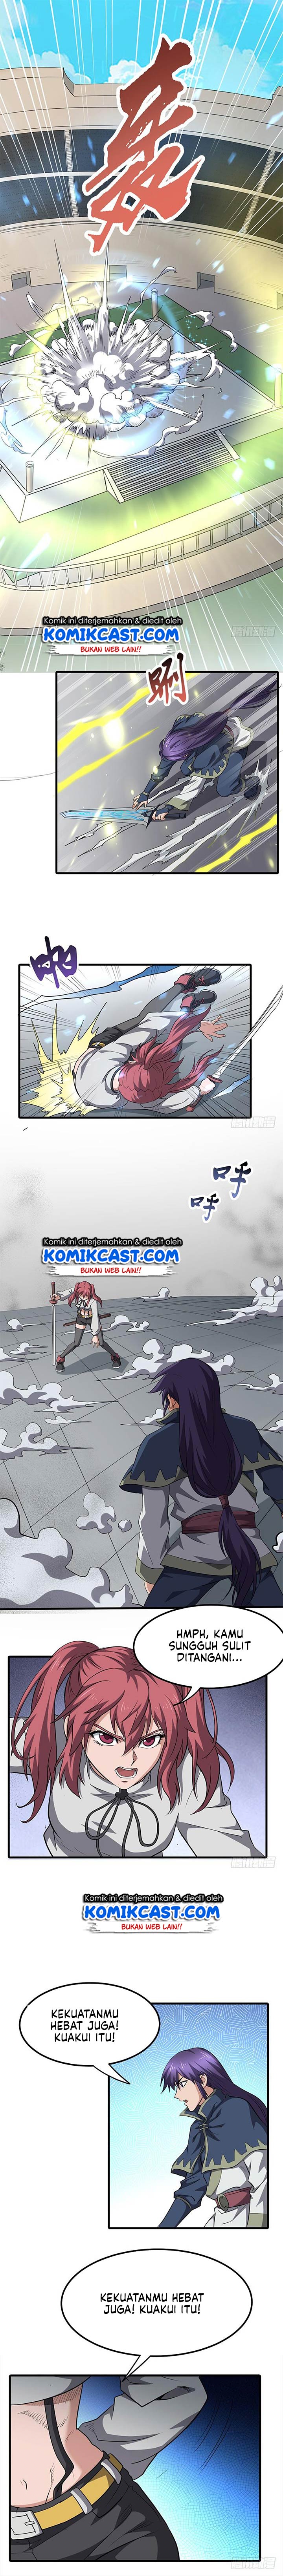 Chaotic Sword God Chapter 166 6